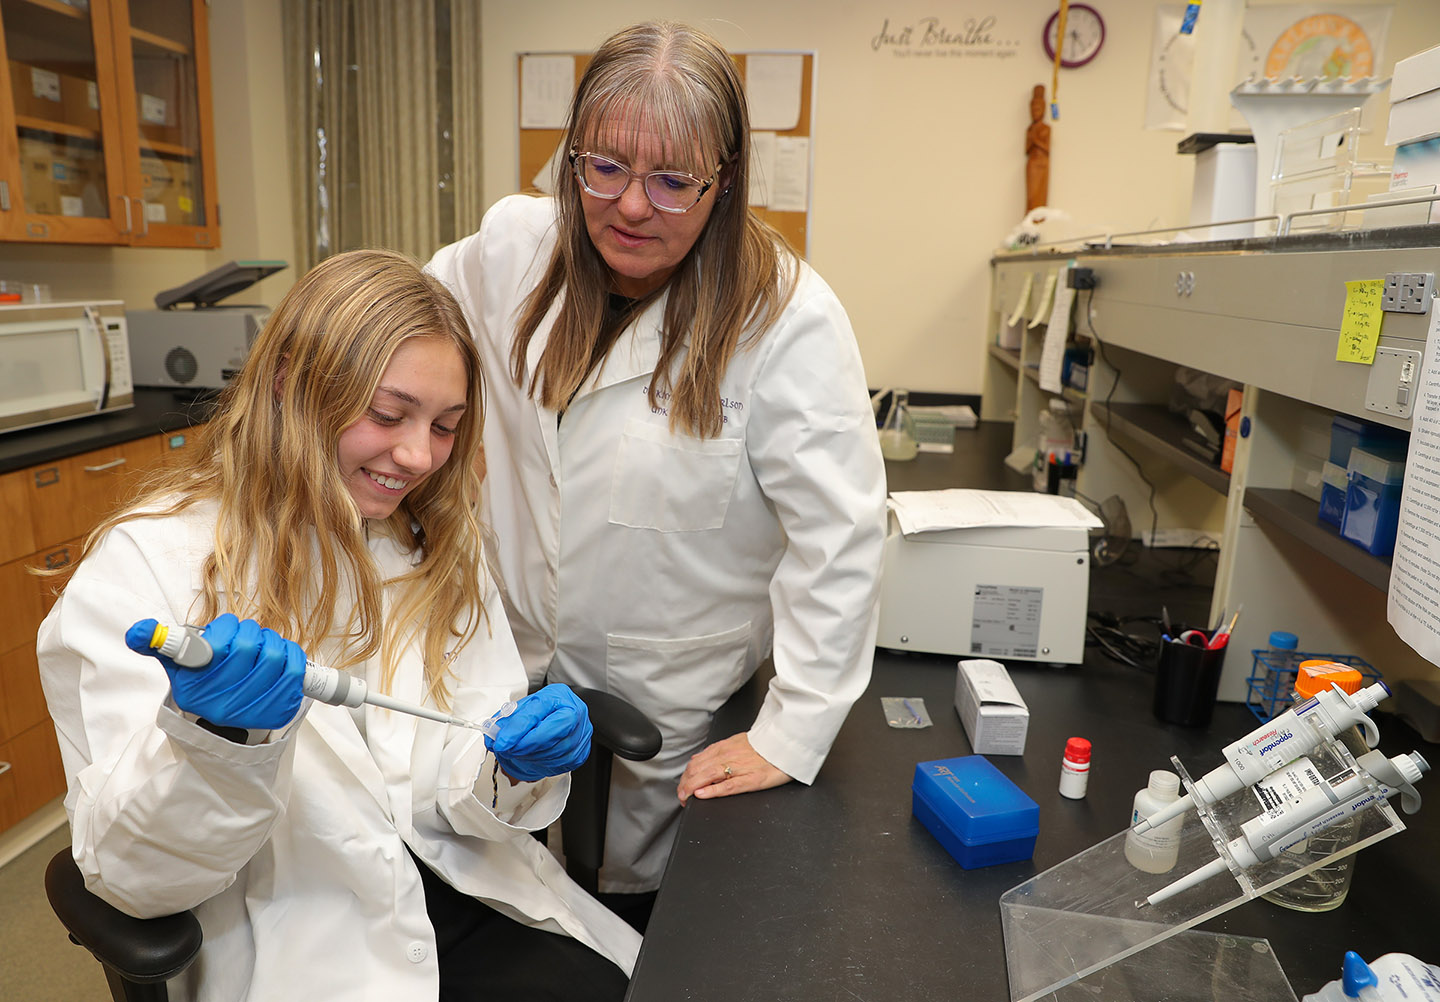 UNK freshman Ella Buhlke, left, and biology professor Kim Carlson have been conducting research together since 2019, when Buhlke was a sophomore at Central City High School. (Photos by Erika Pritchard, UNK Communications)